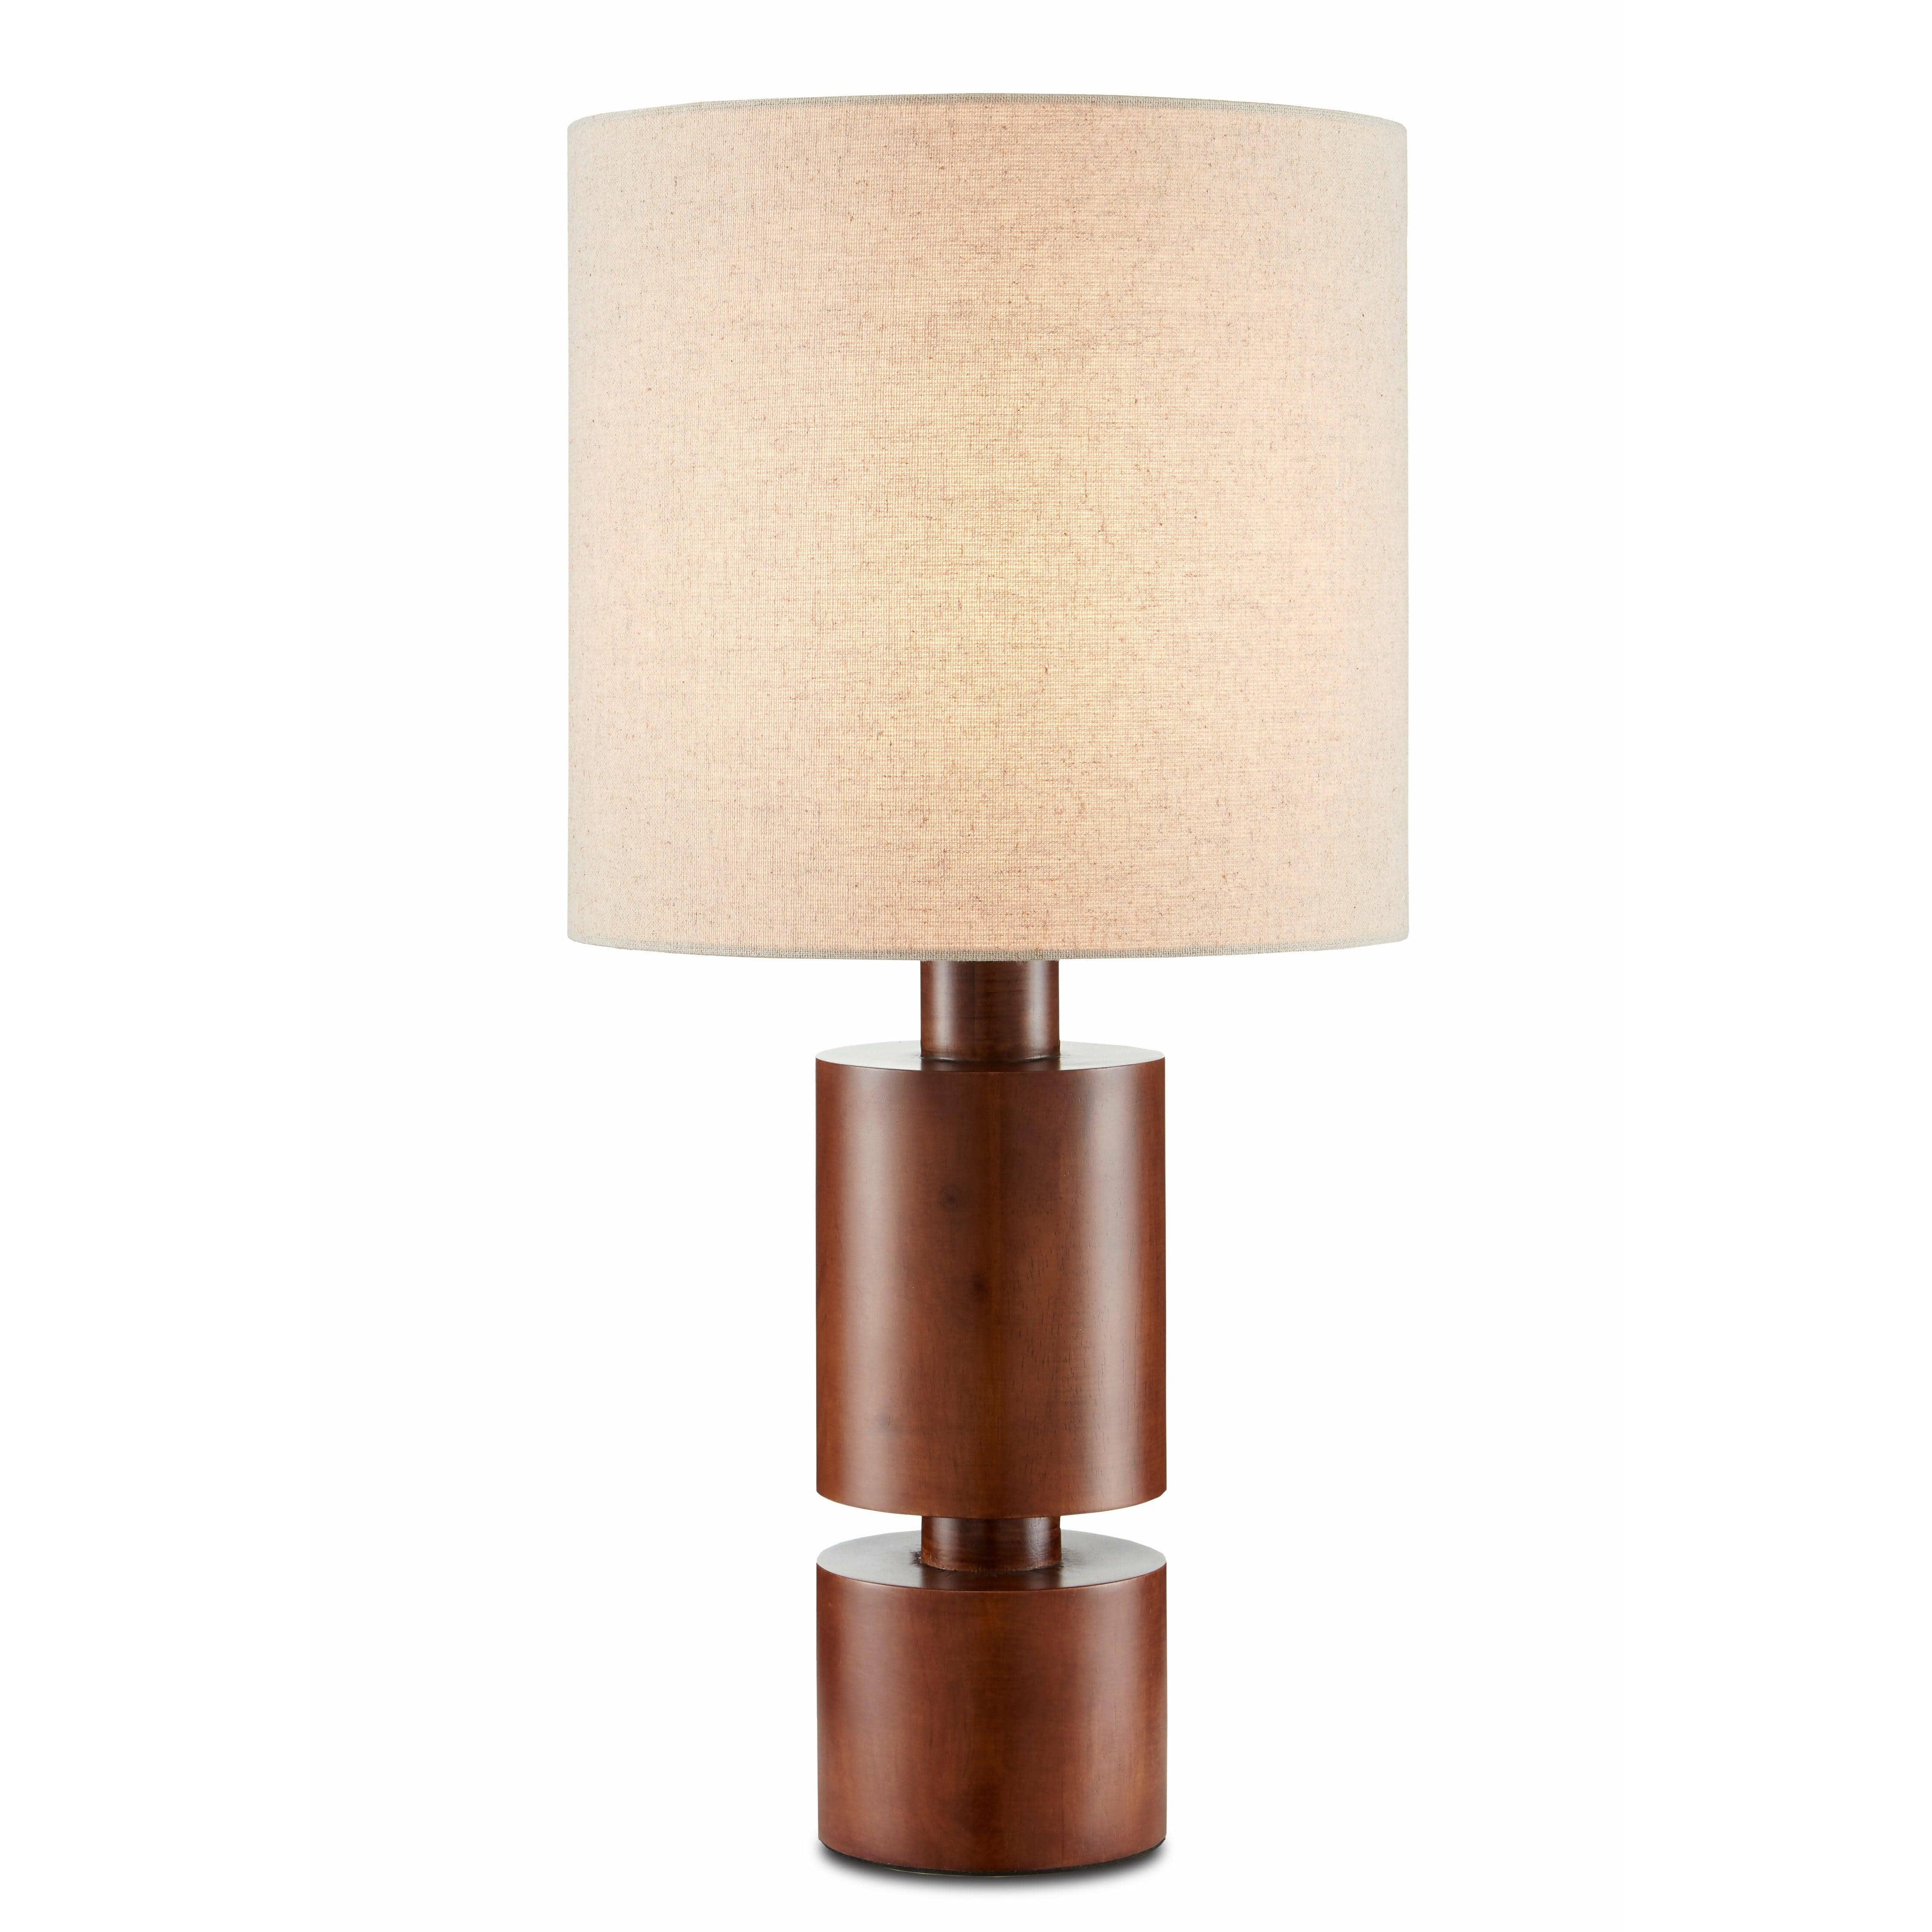 Currey and Company - Vero Table Lamp - 6000-0778 | Montreal Lighting & Hardware